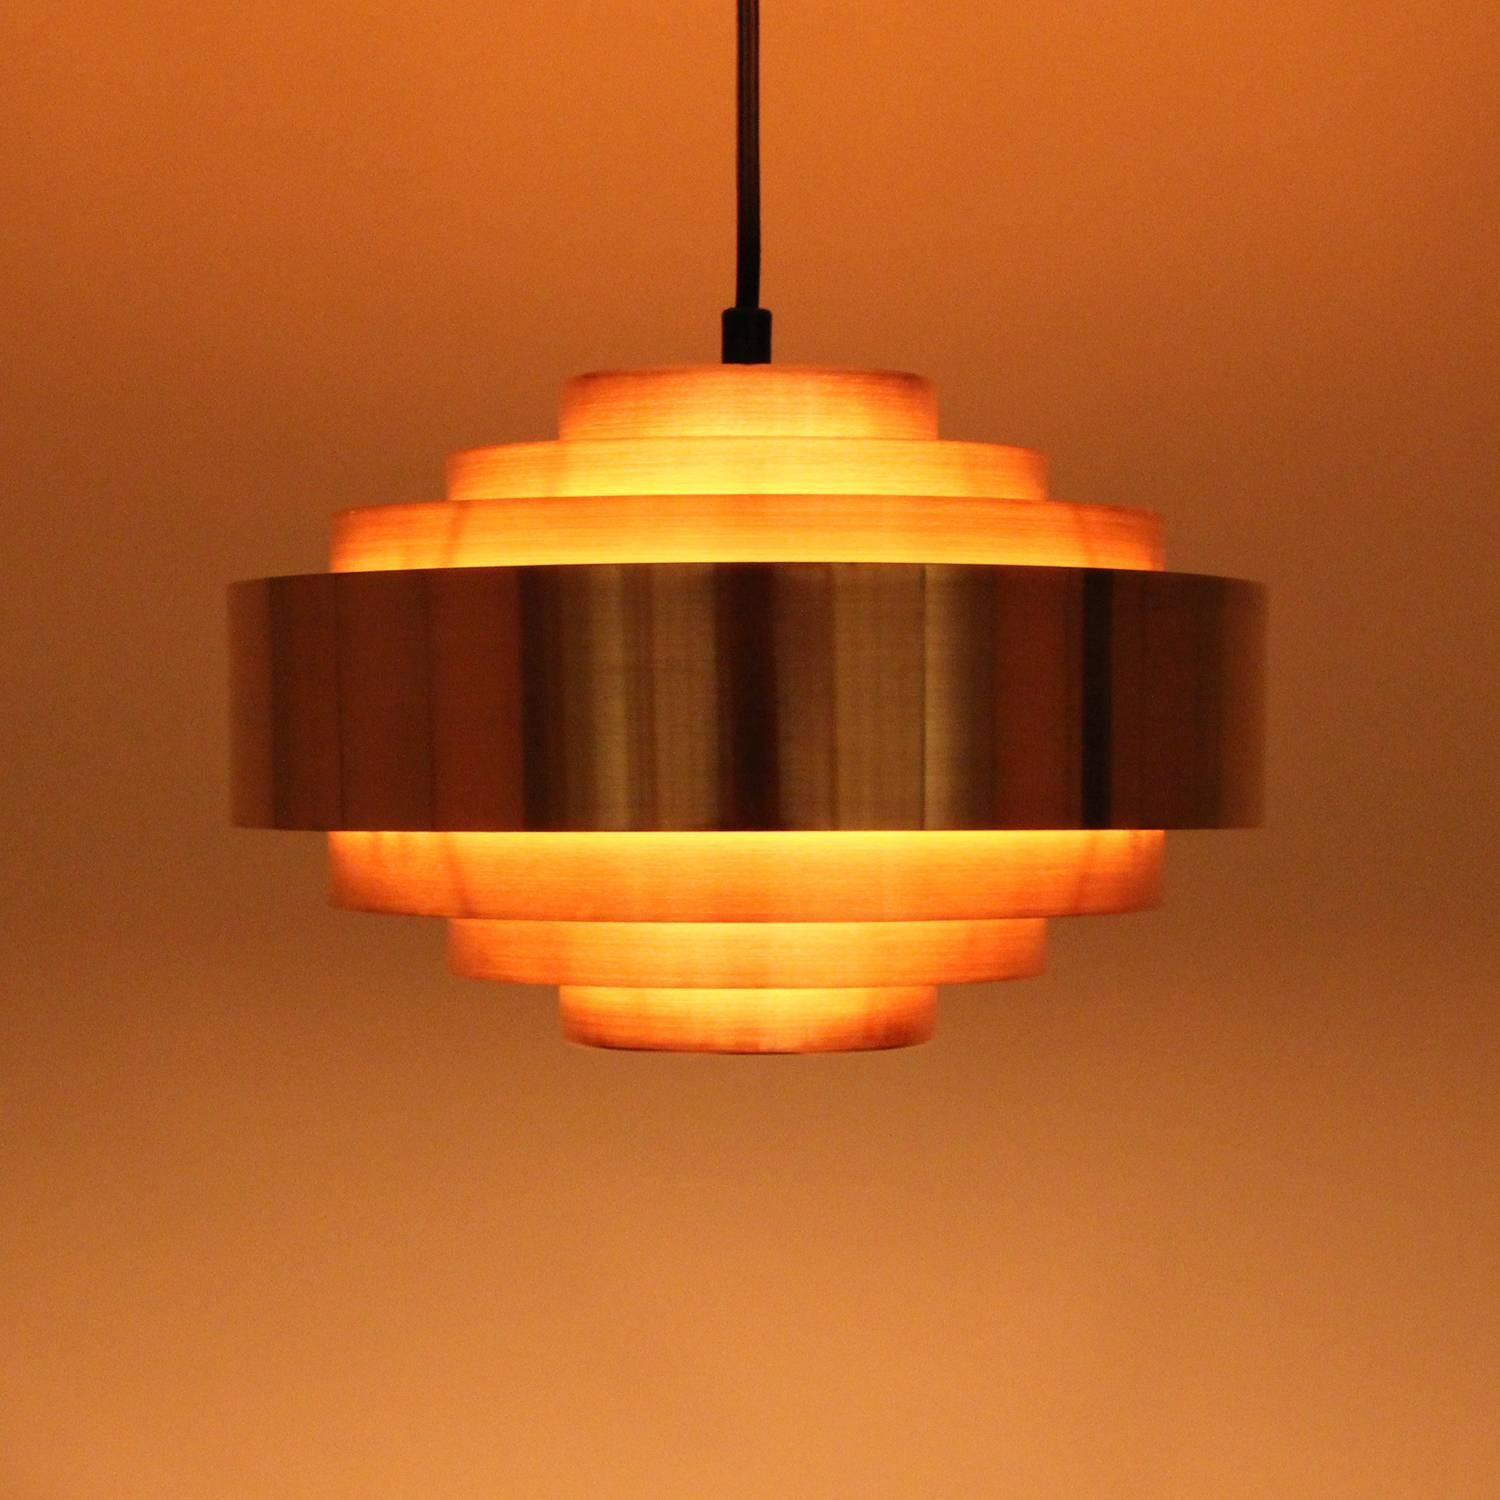 Ultra, copper pendant light by Jo Hammerborg for Fog & Mørup in 1963 - stylish Scandinavian Modern copper ceiling light in very good vintage condition.

The Ultra is a beautiful pendant light, comprised of seven polished copper rings encompassing